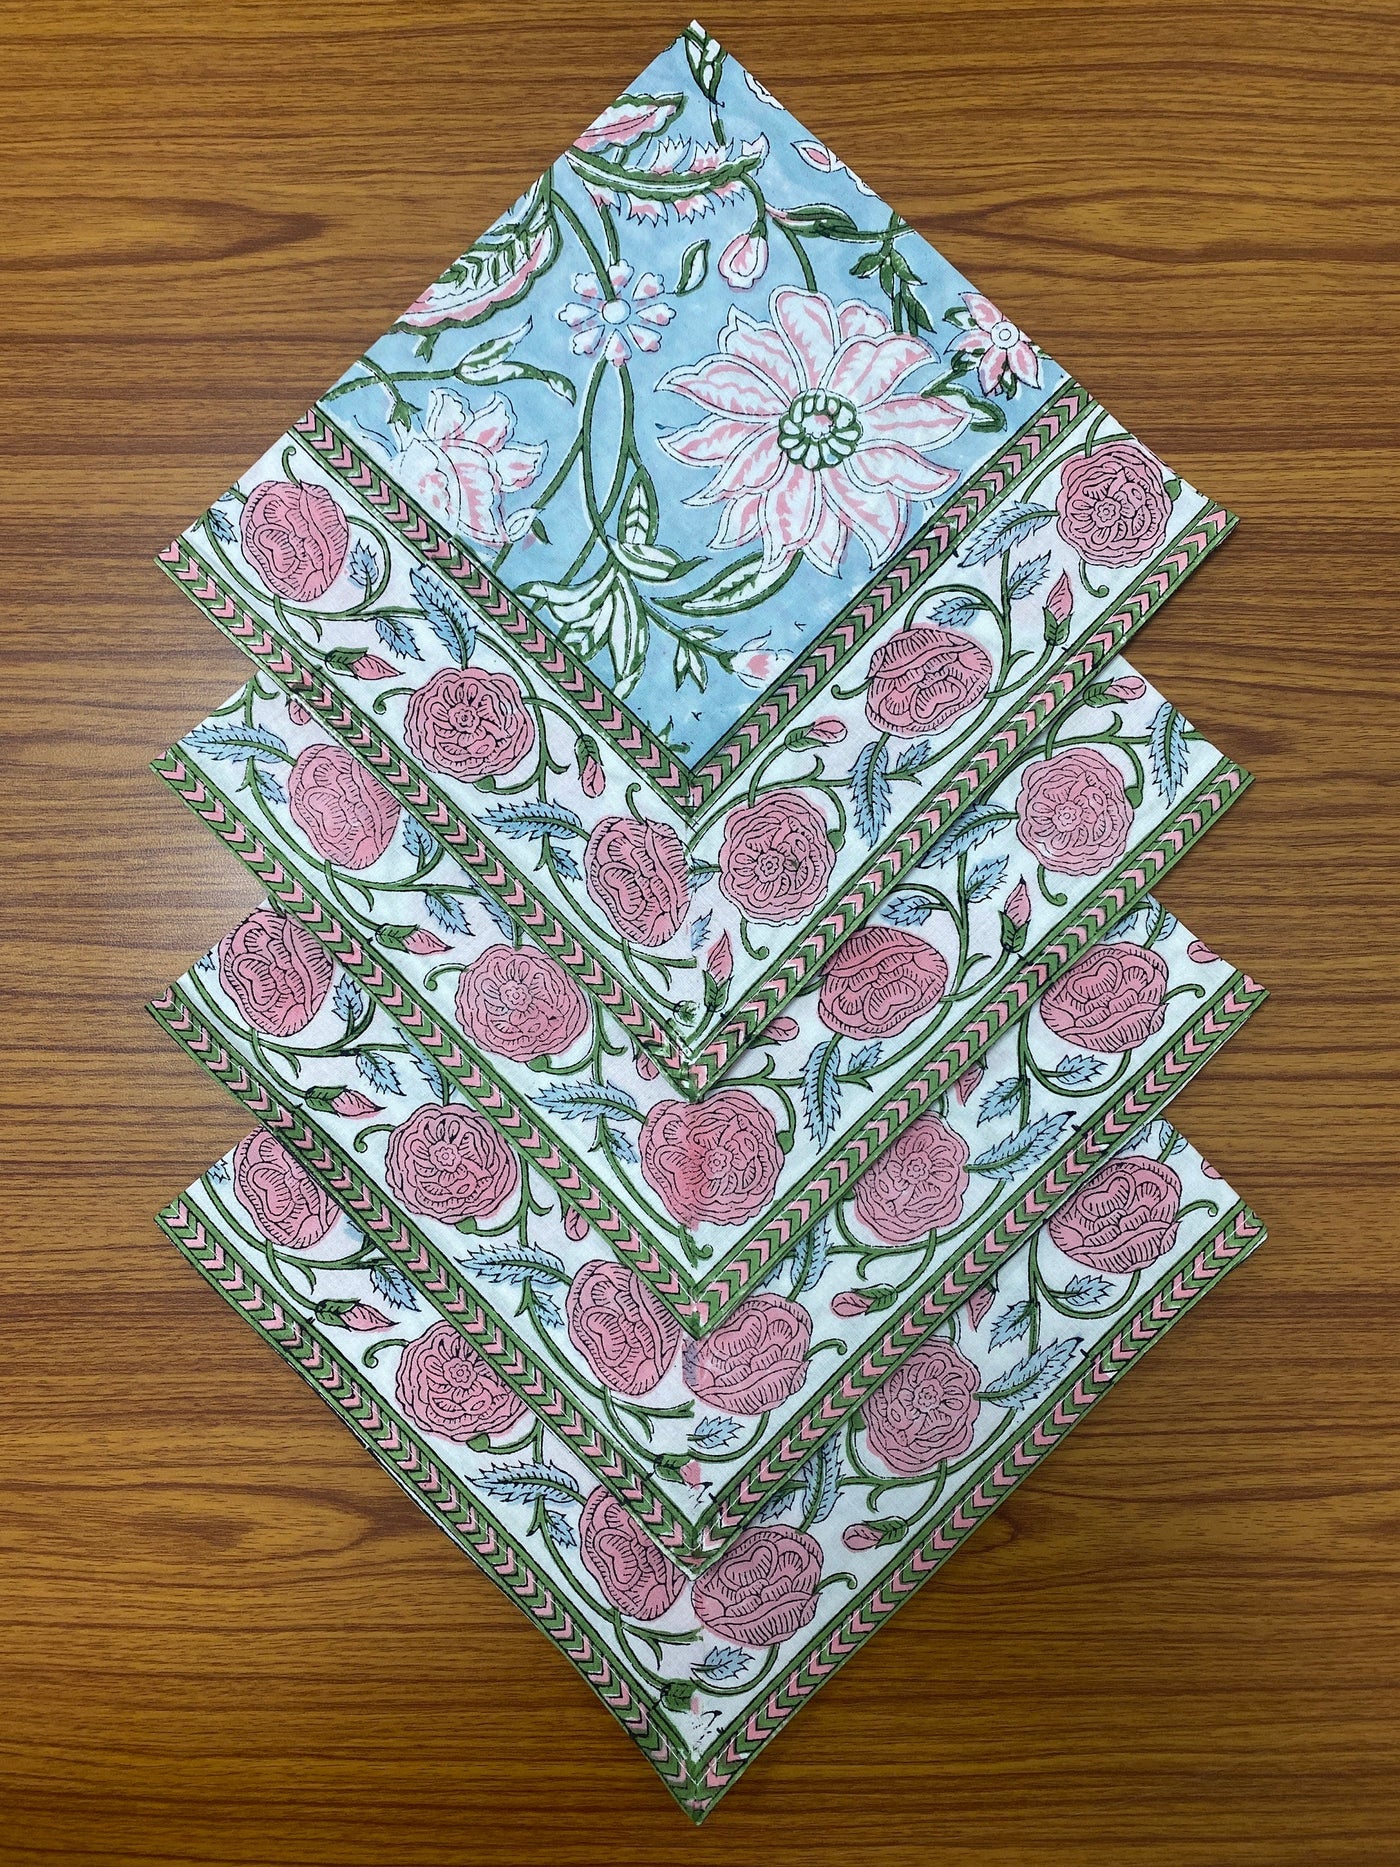 Ice Blue, Kelly Green, Pink Indian Floral Hand Block Printed Cotton Cloth Napkins Size 20x20" Set of 4,6,12,24,48 Wedding Events Home Party